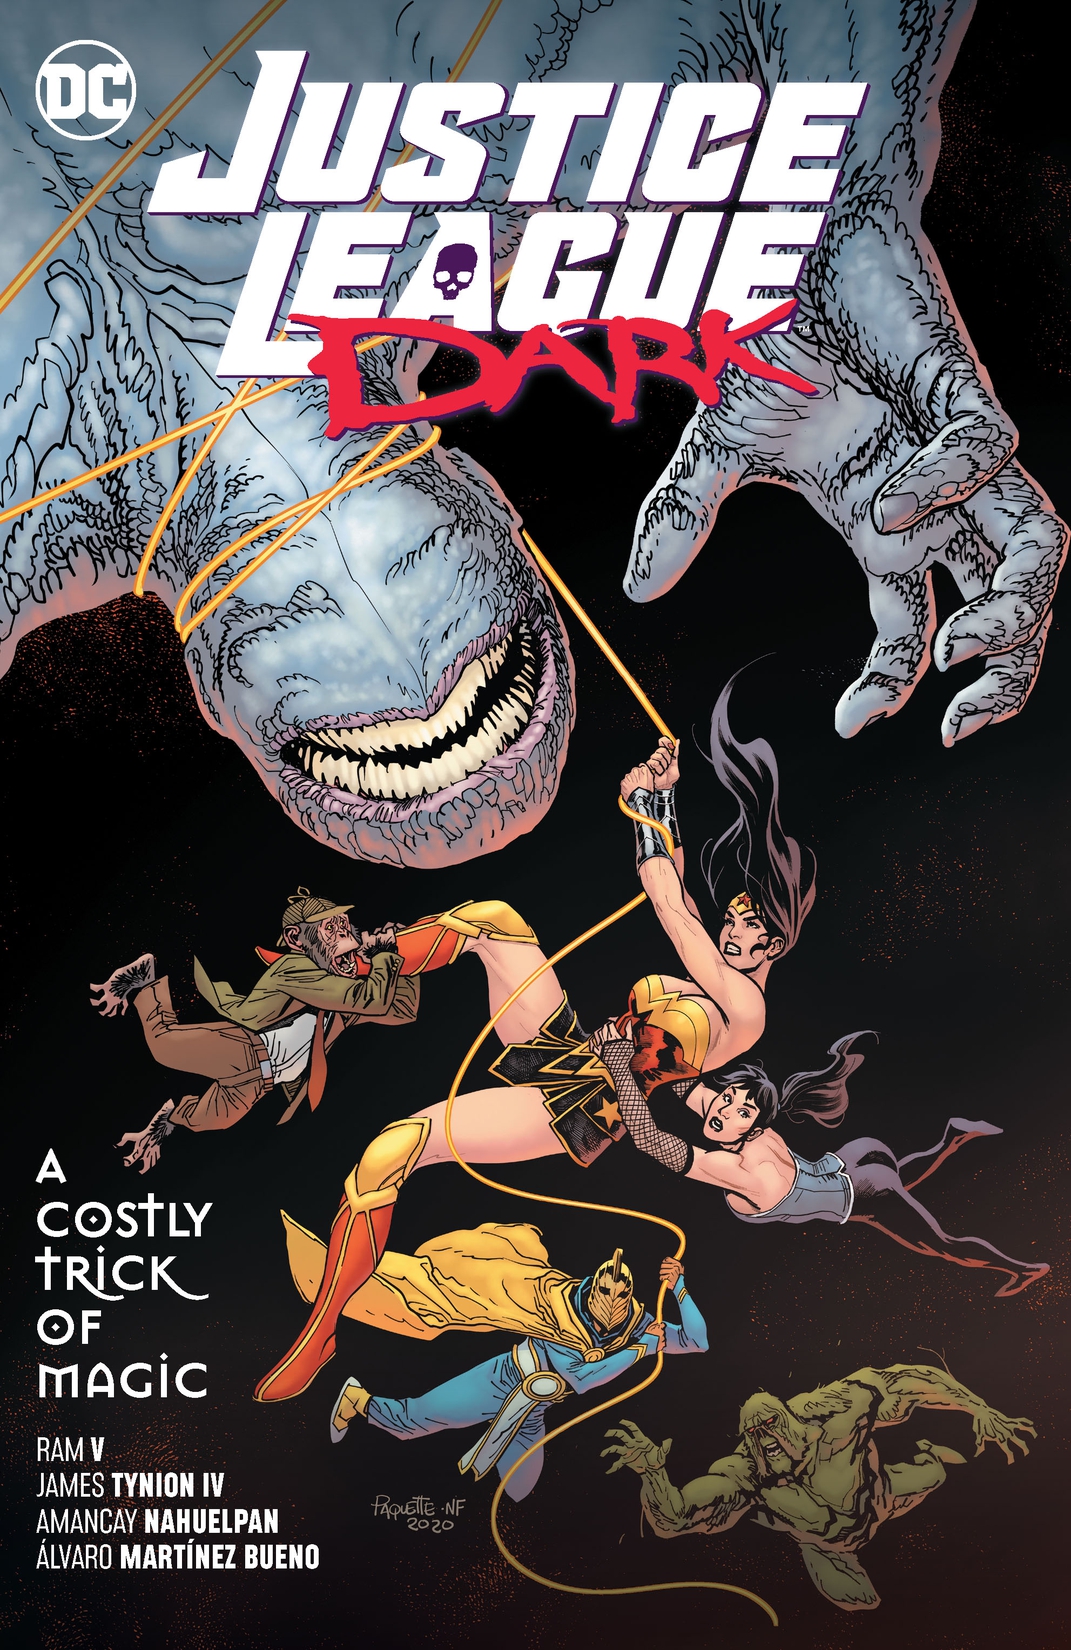 Justice League Dark Vol. 4: A Costly Trick of Magic preview images